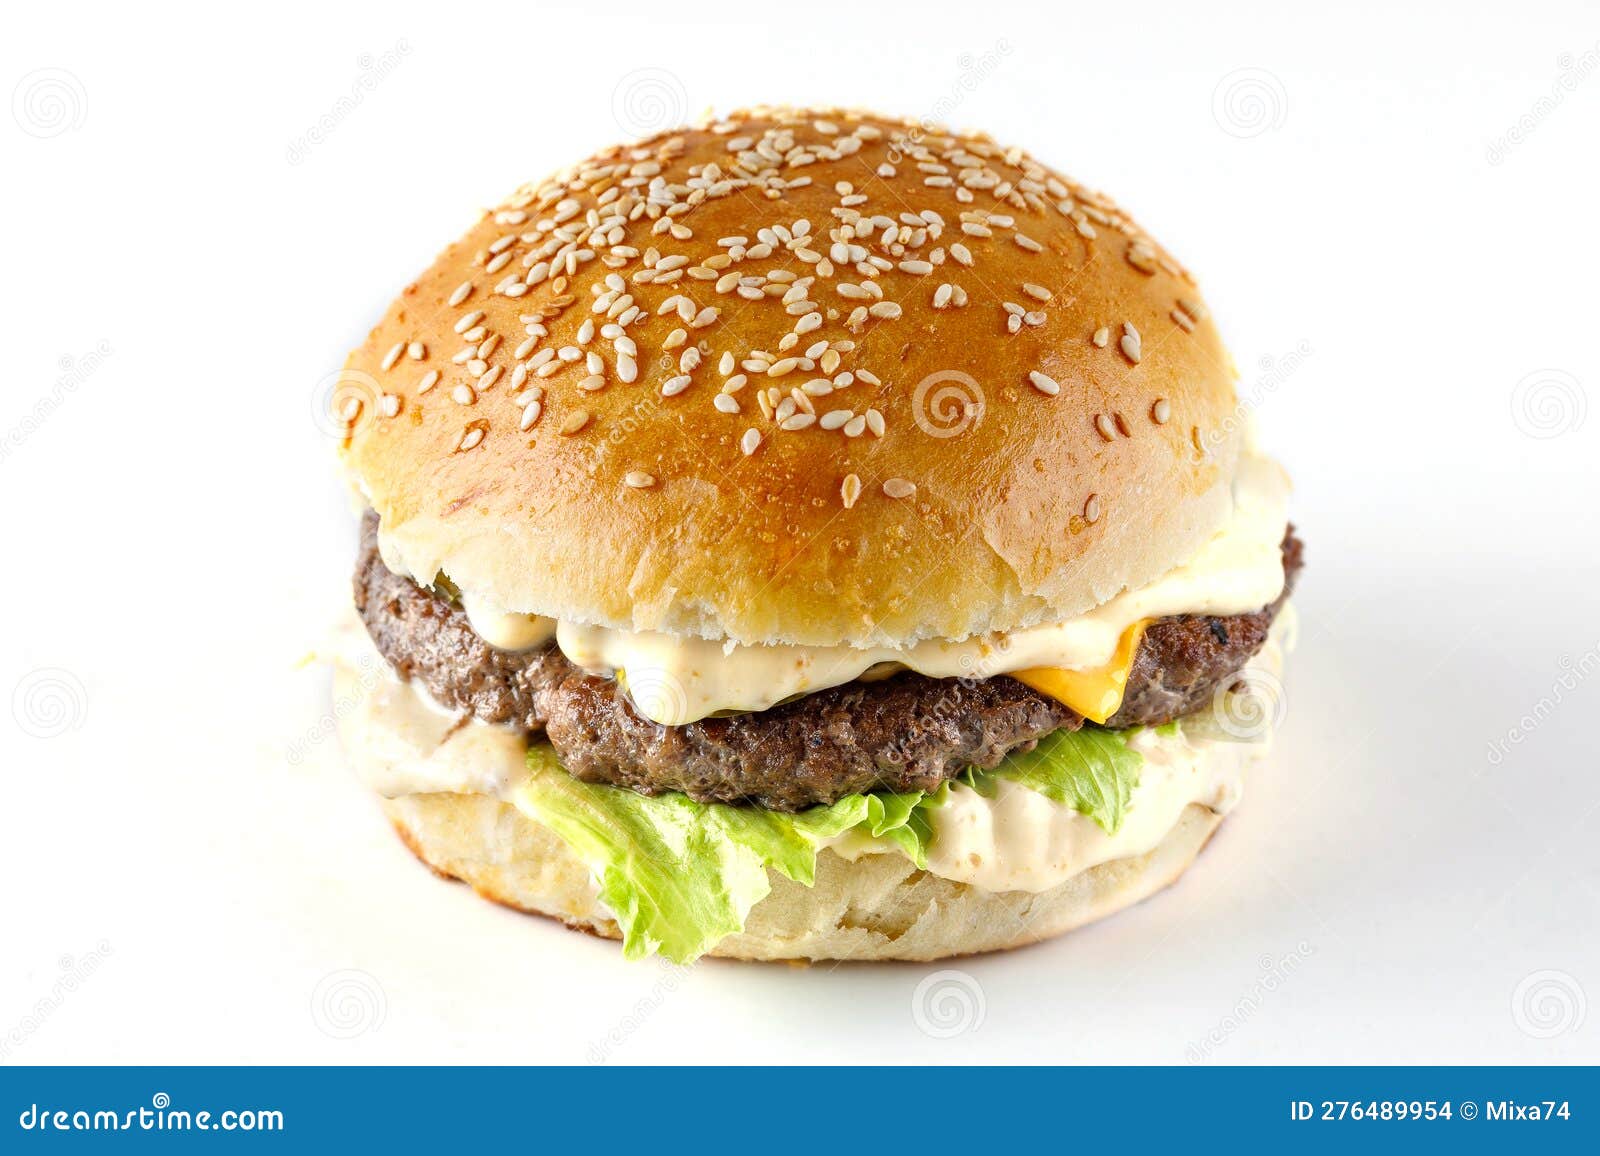 classic burger like in mcdonalds with beef cutlet on white background for menu and website  of food delivery restaurant 1